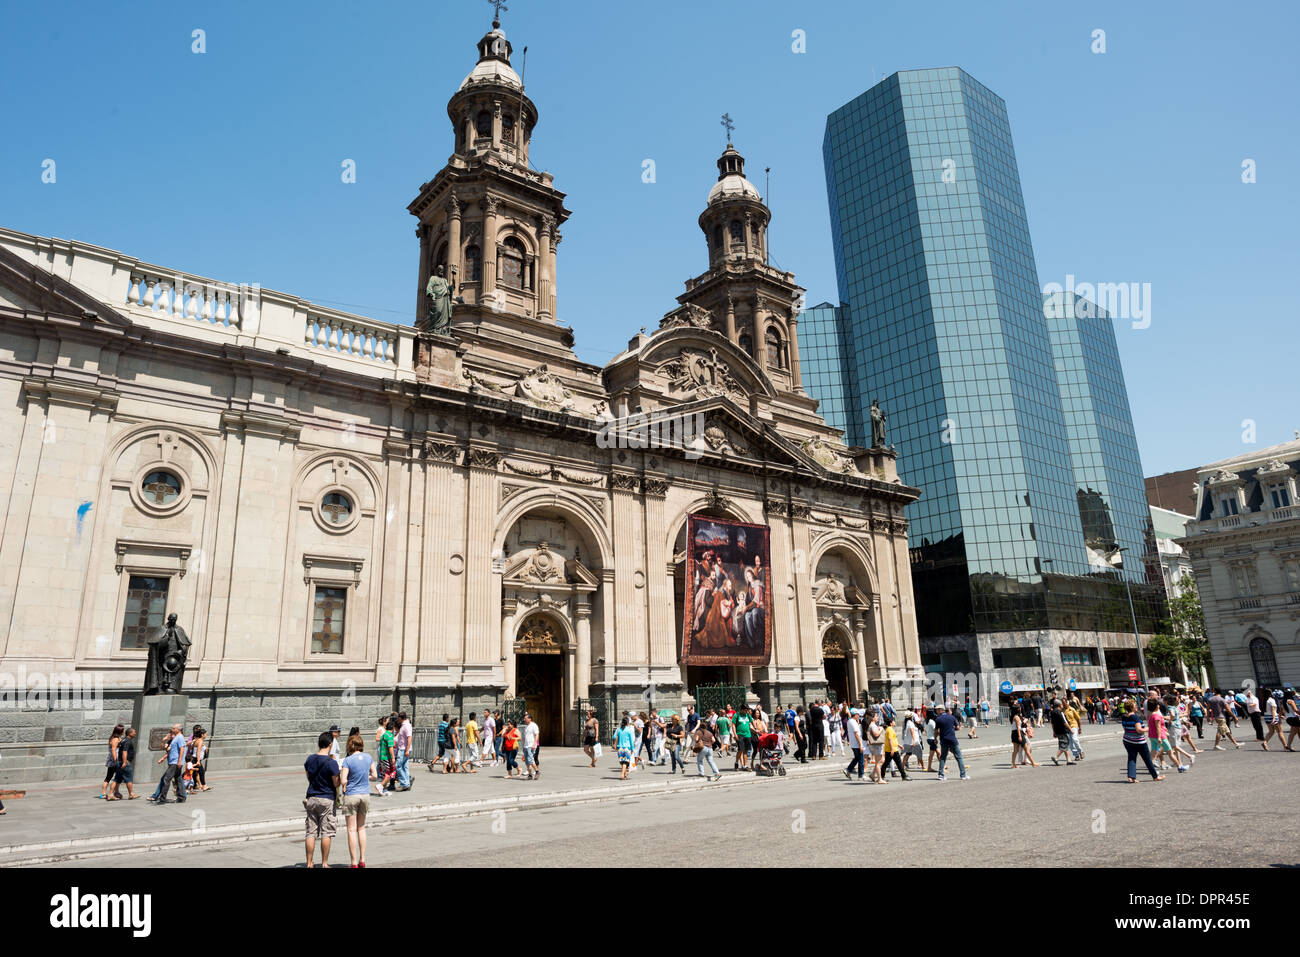 SANTIAGO, Chile - The exterior of the Metropolitan Cathedral of Santiago (Catedral Metropolitana de Santiago) in the heart of Santiago, Chile, facing Plaza de Armas. The original cathedral was constructed during the period 1748 to 1800 (with subsequent alterations) of a neoclassical design. Stock Photo